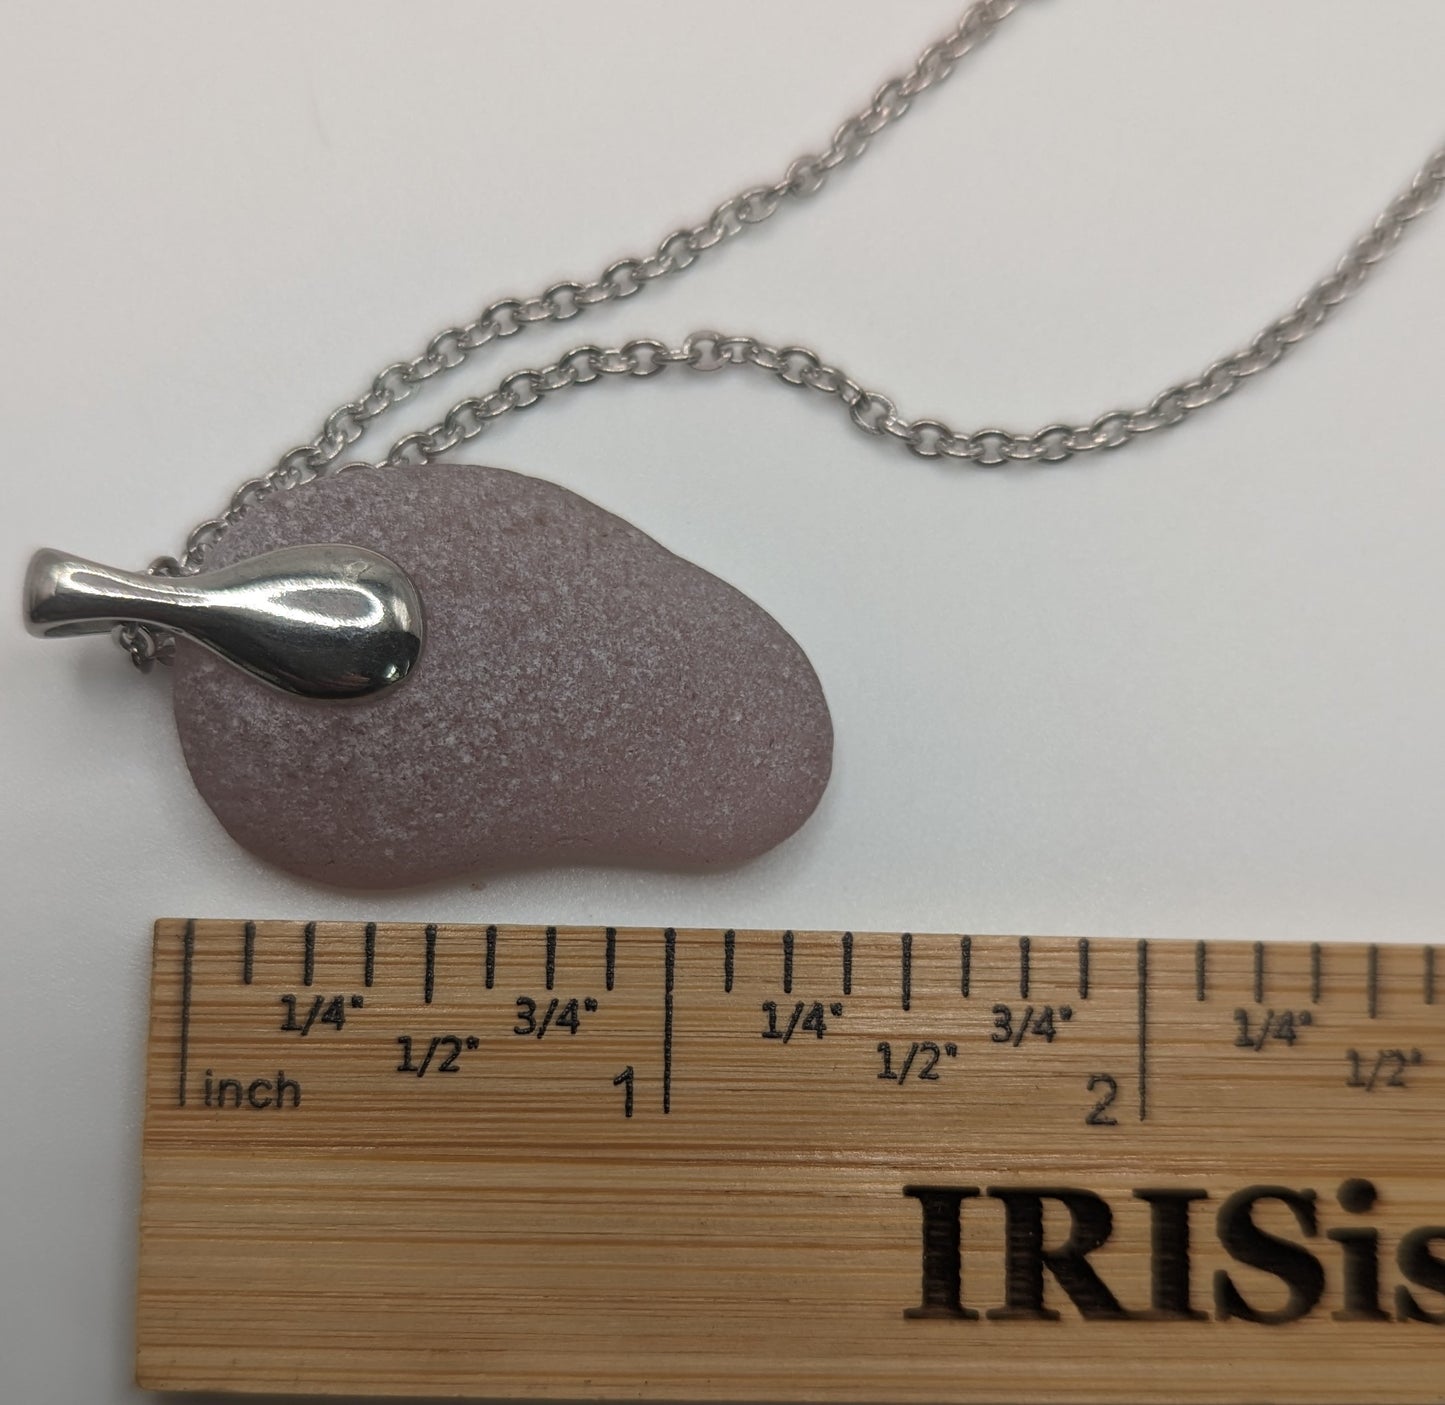 Lavender Seaglass necklace with stainless steel chain, seaglass jewelry, genuine beach tumbled sea glass